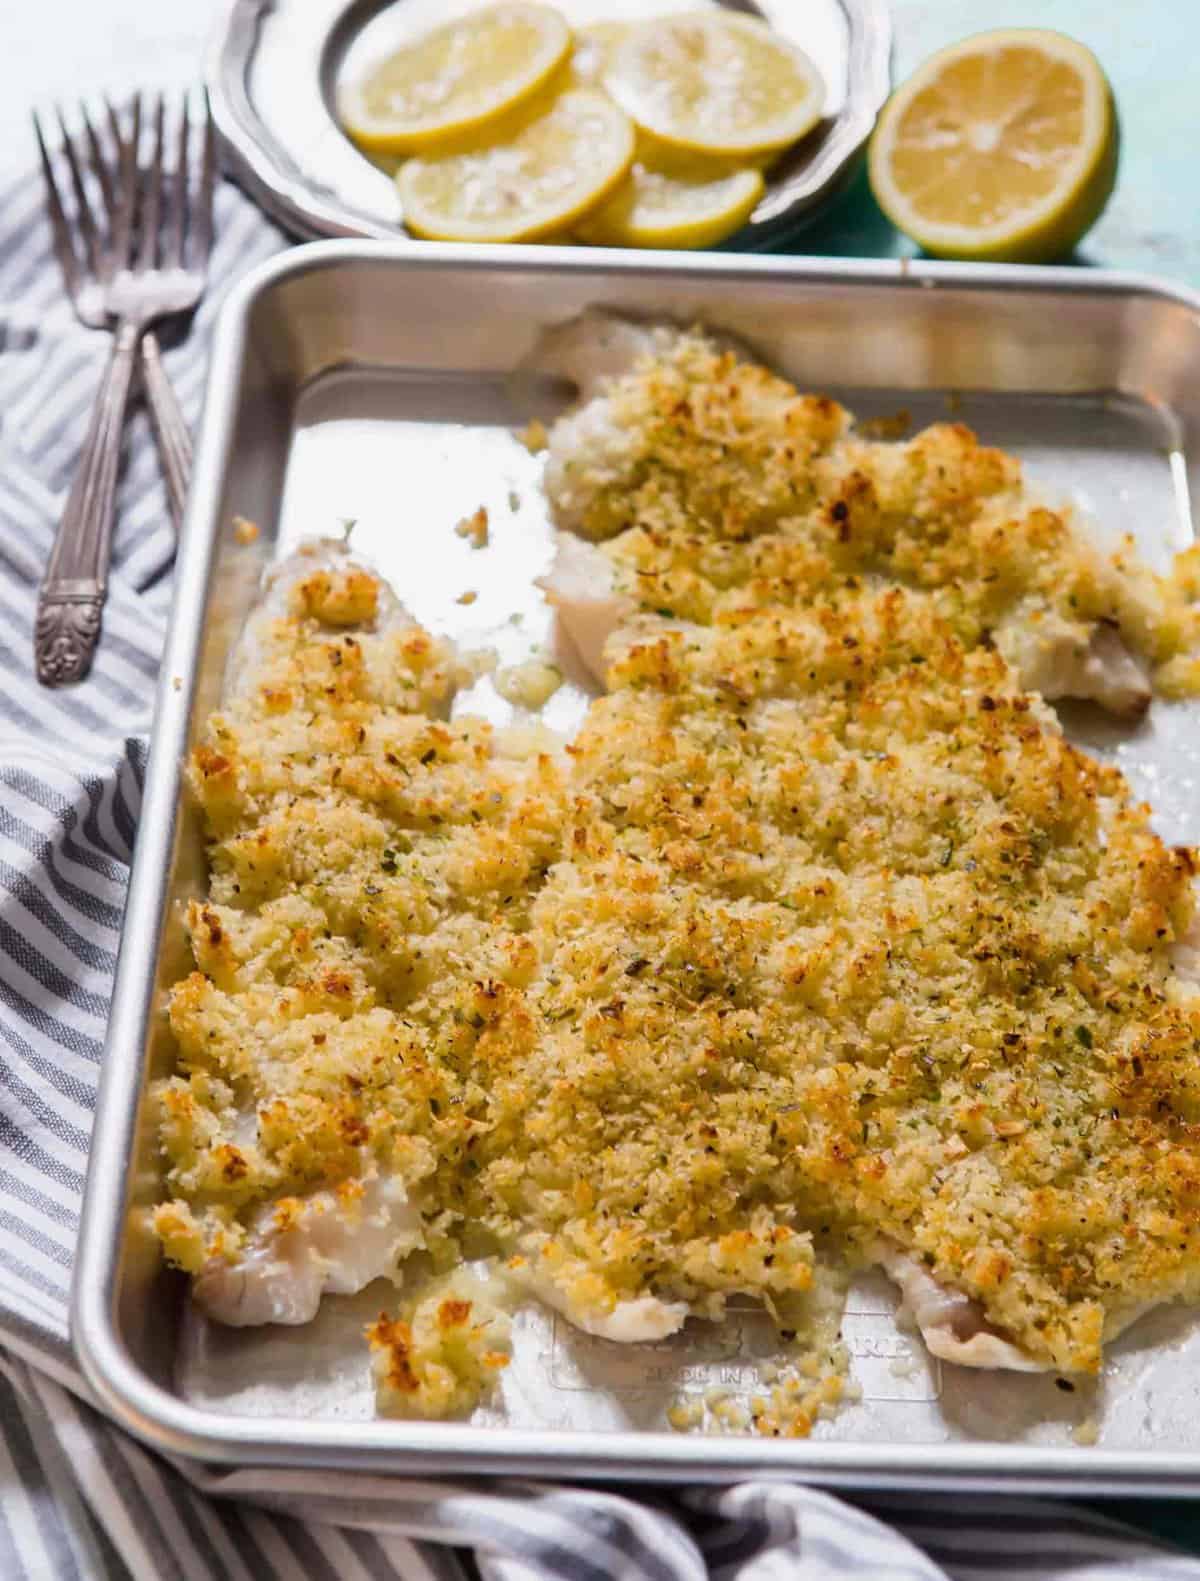 Crispy baked haddock on a sheet pan with two forks and lemon slices in background